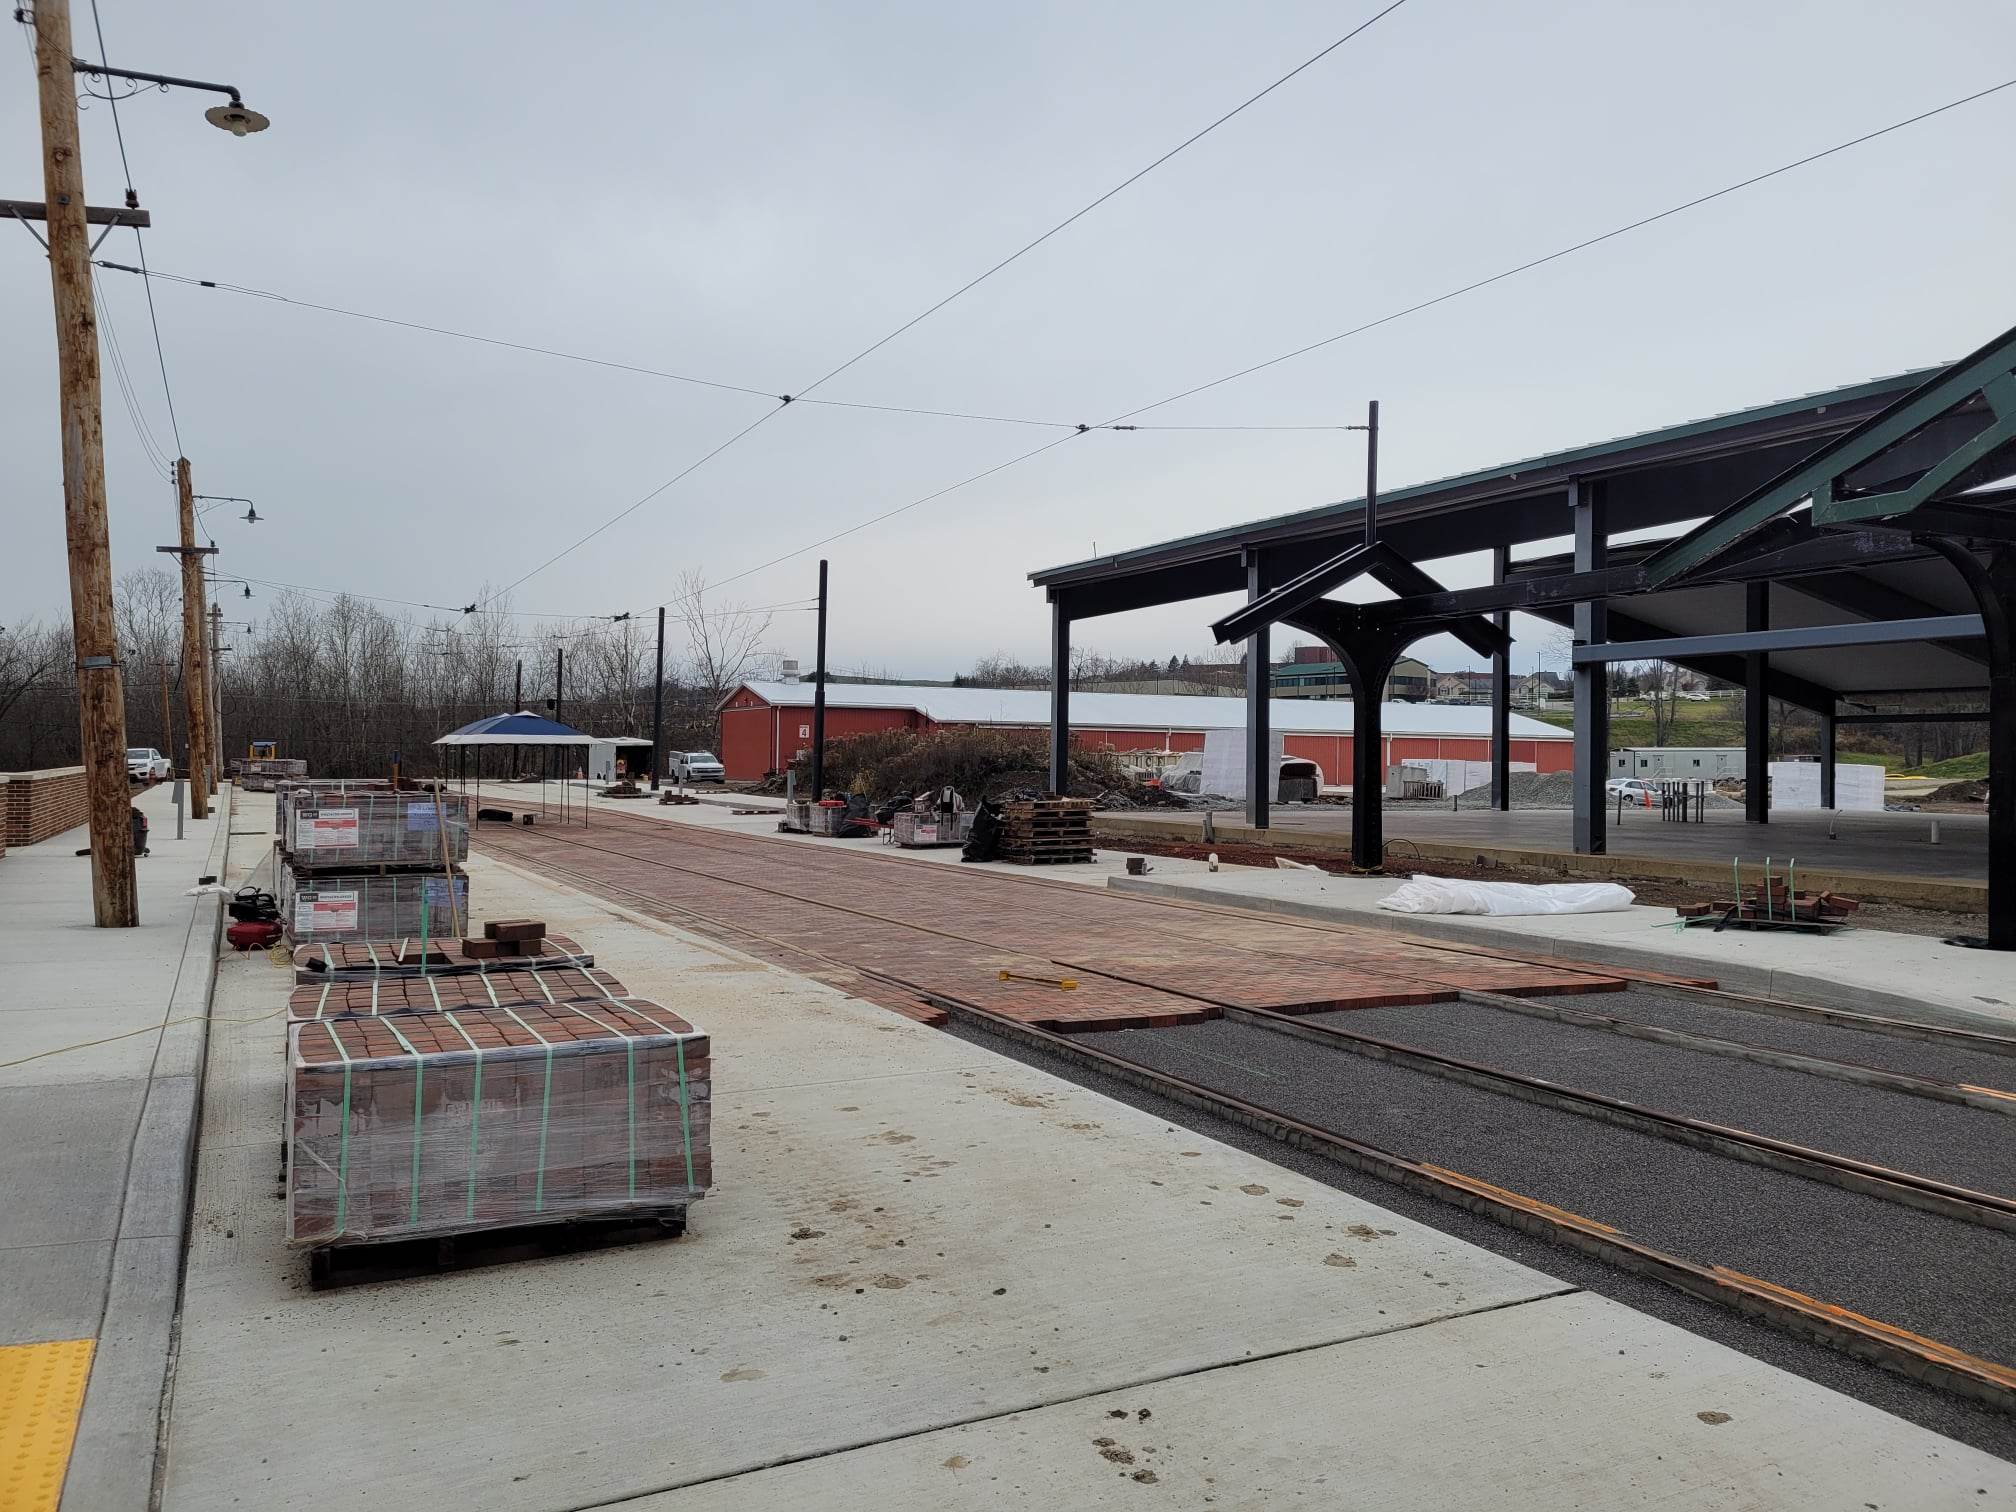 2022-11-15 Brick Moves Up Trolley Street In Mid-November